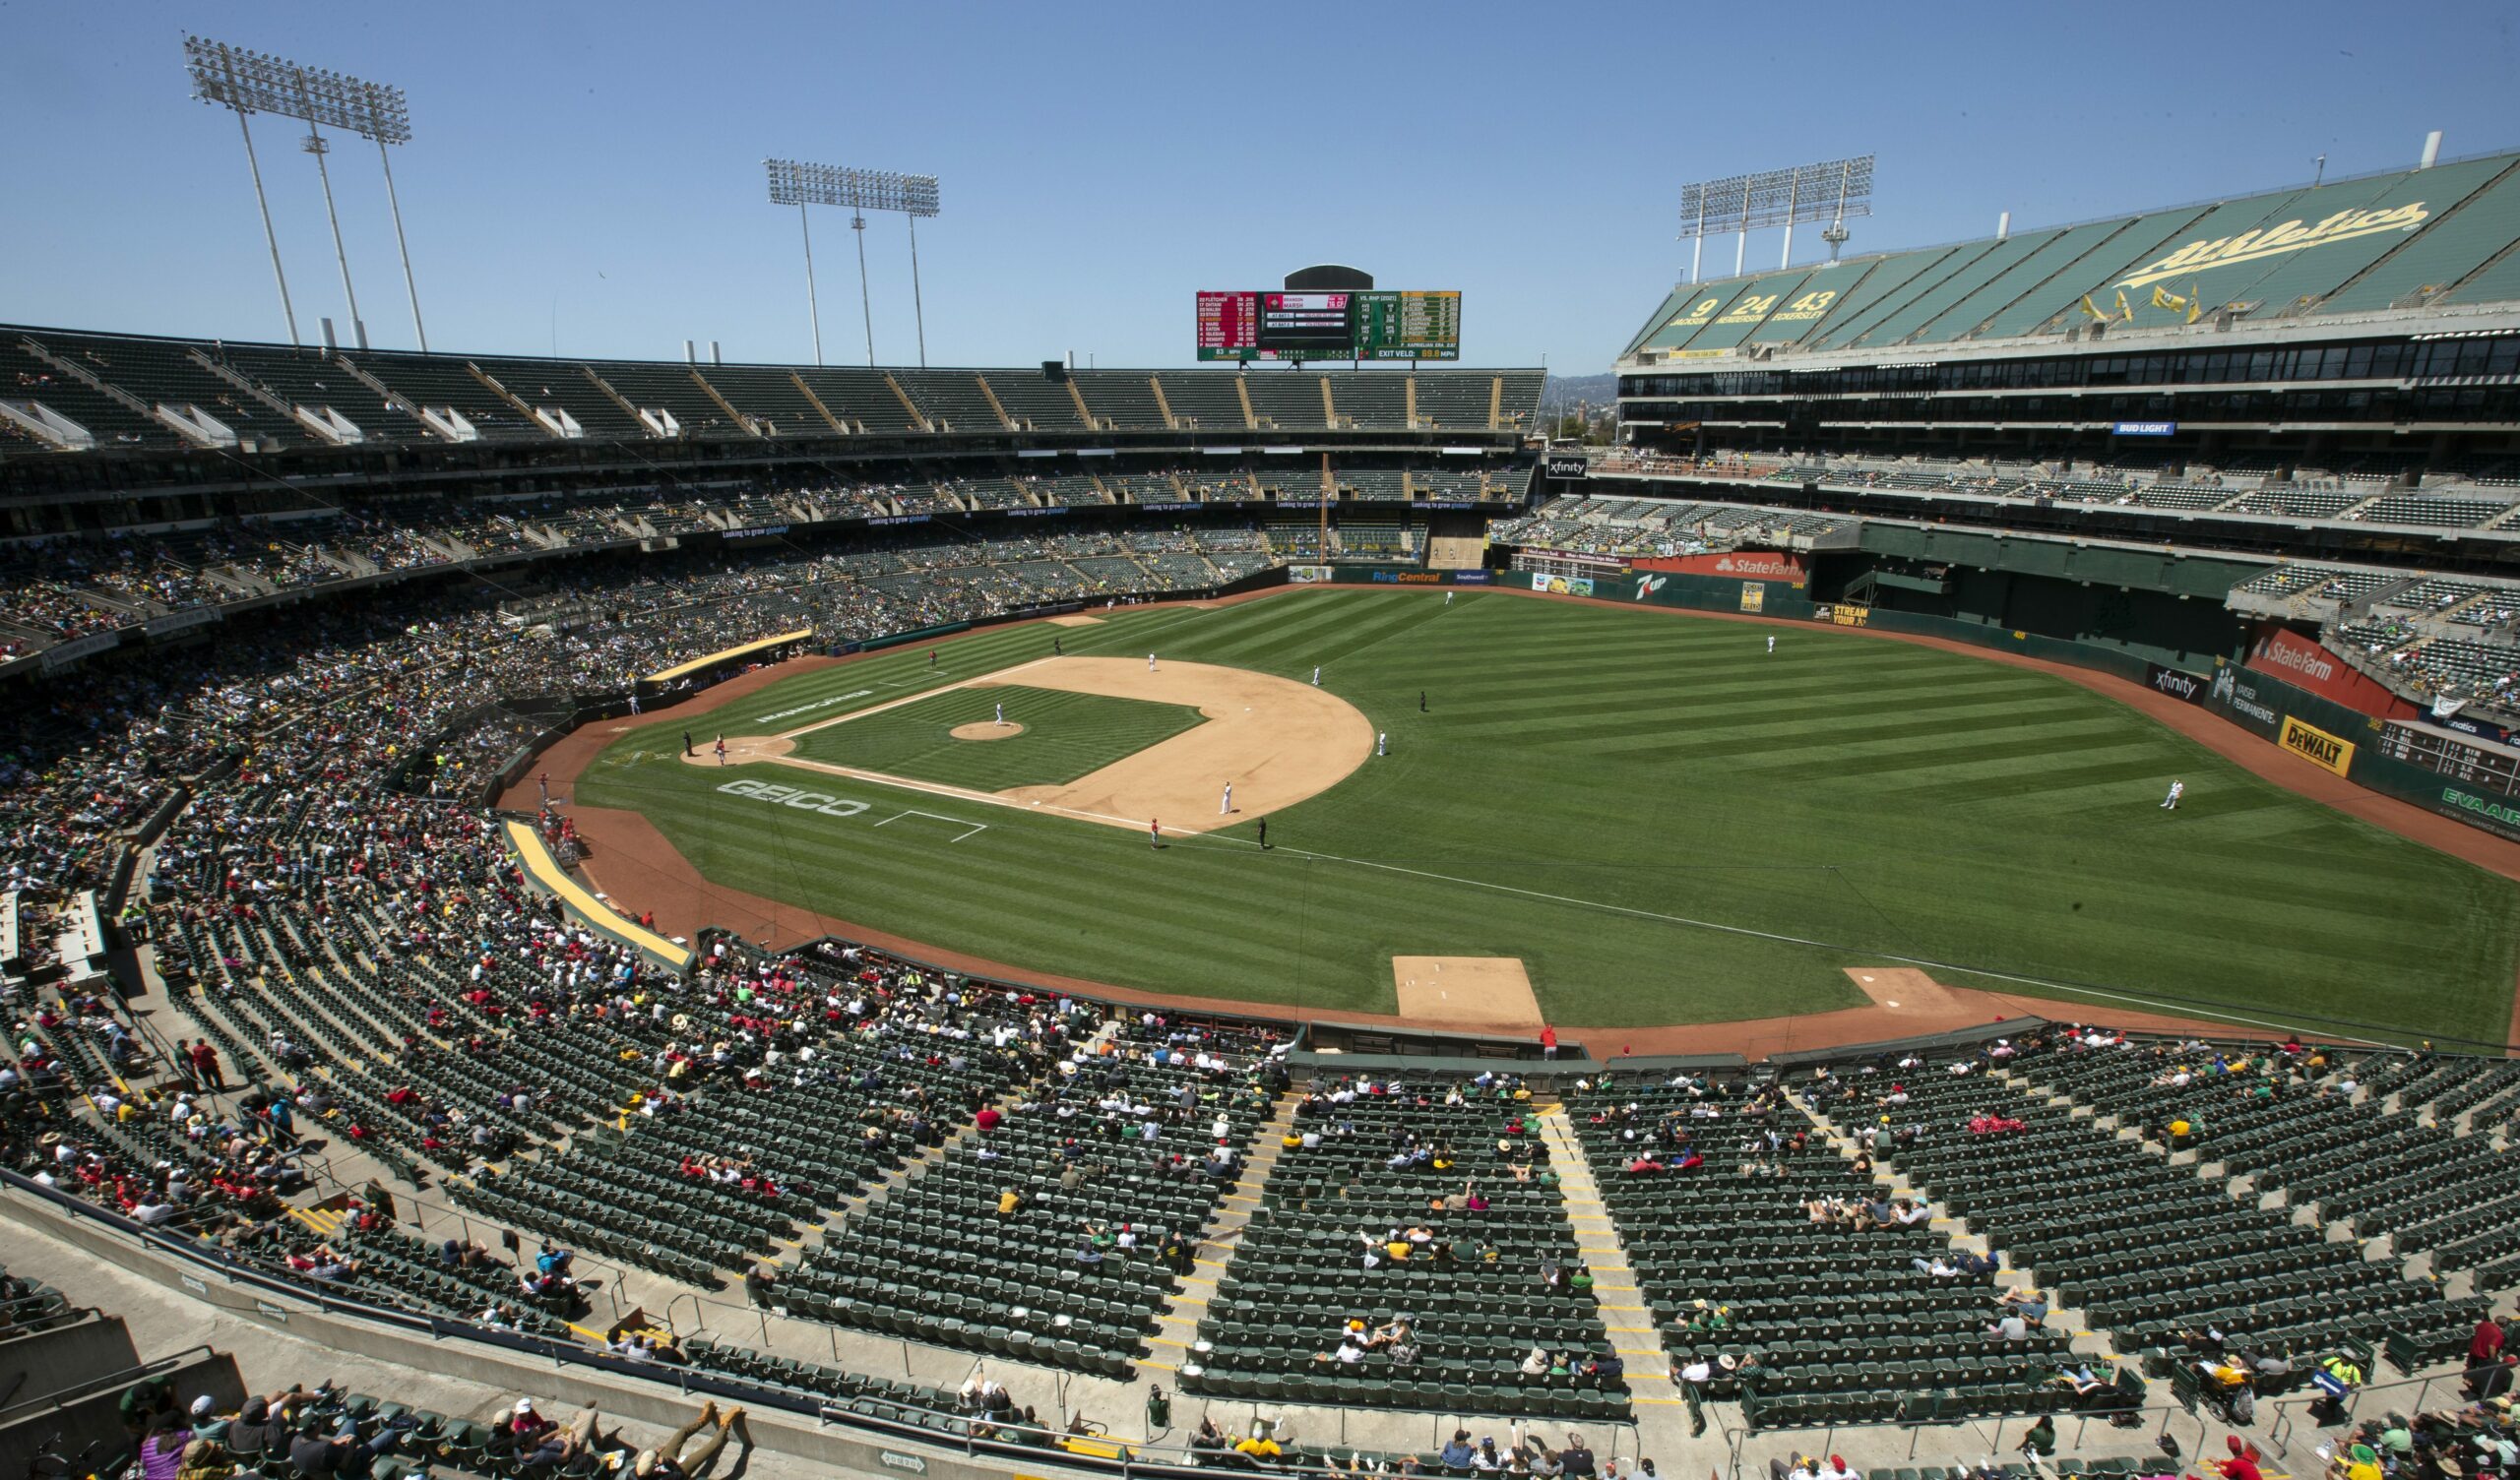 Oakland unbelievably lost all three of its pro sports teams in just 5 years